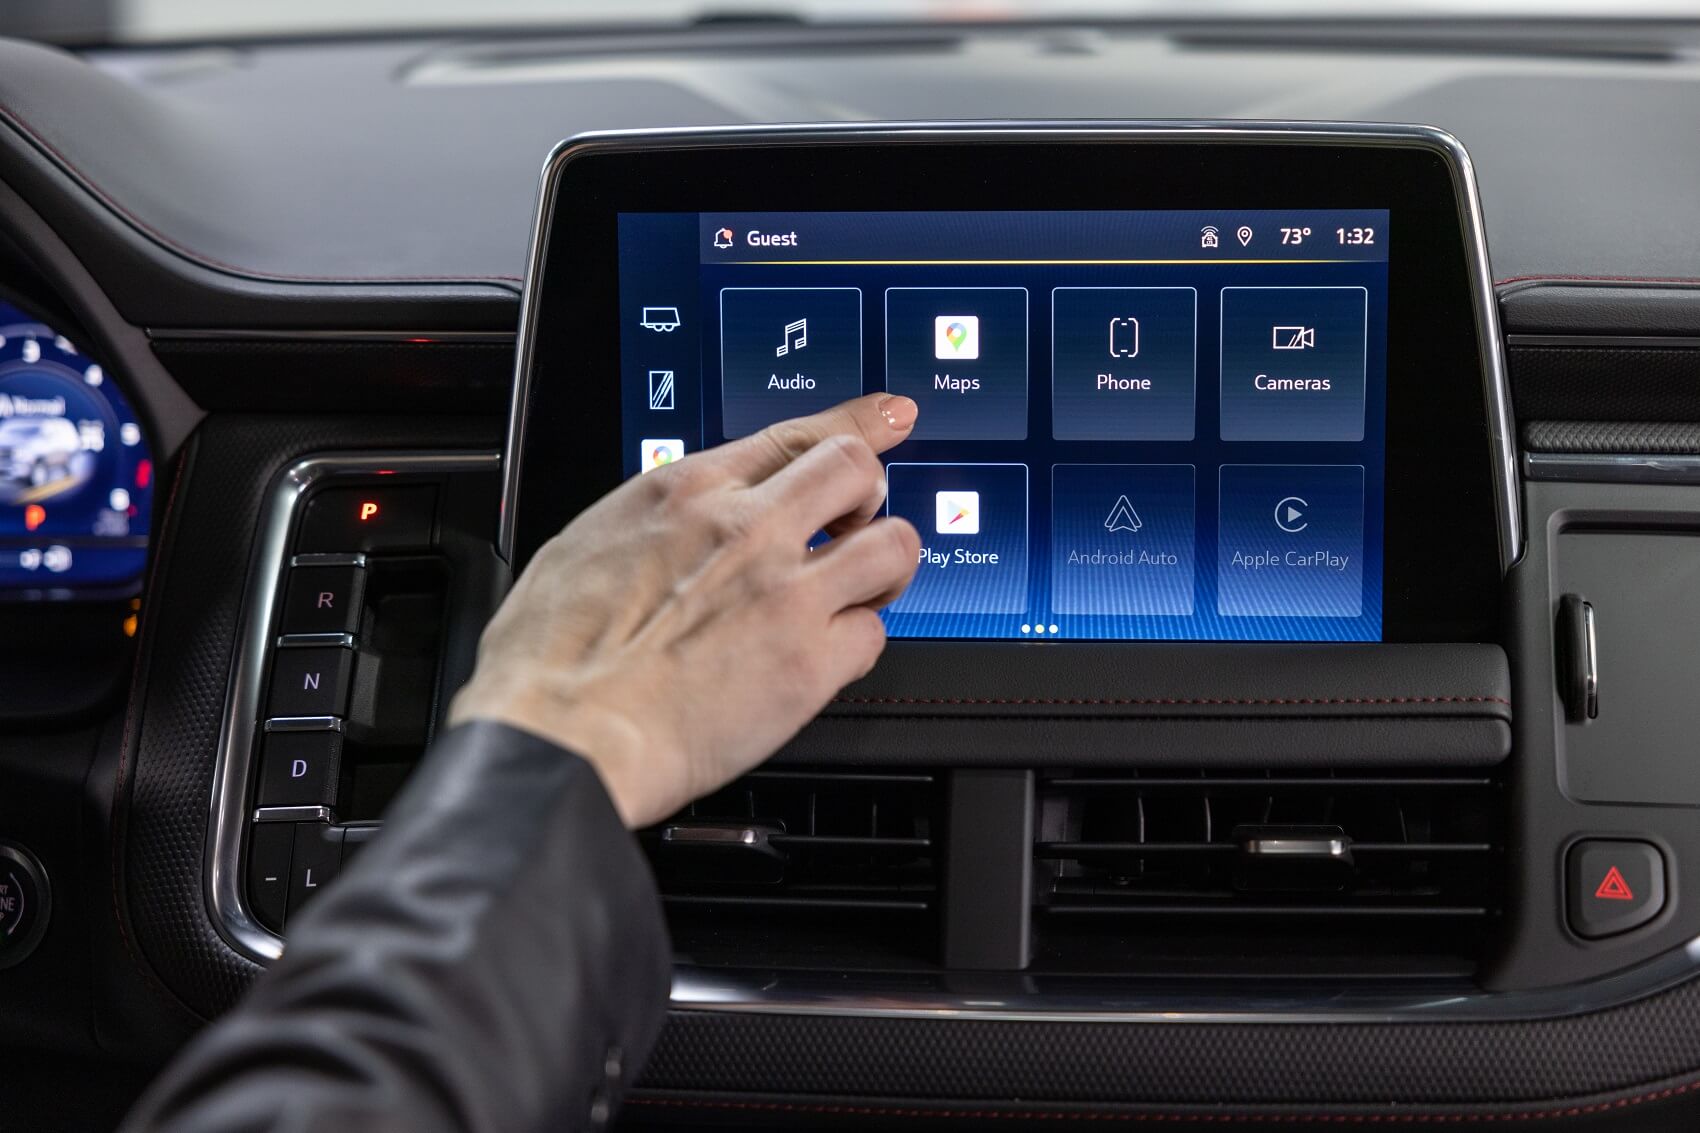 chevy suburban dashboard technology with touch screen